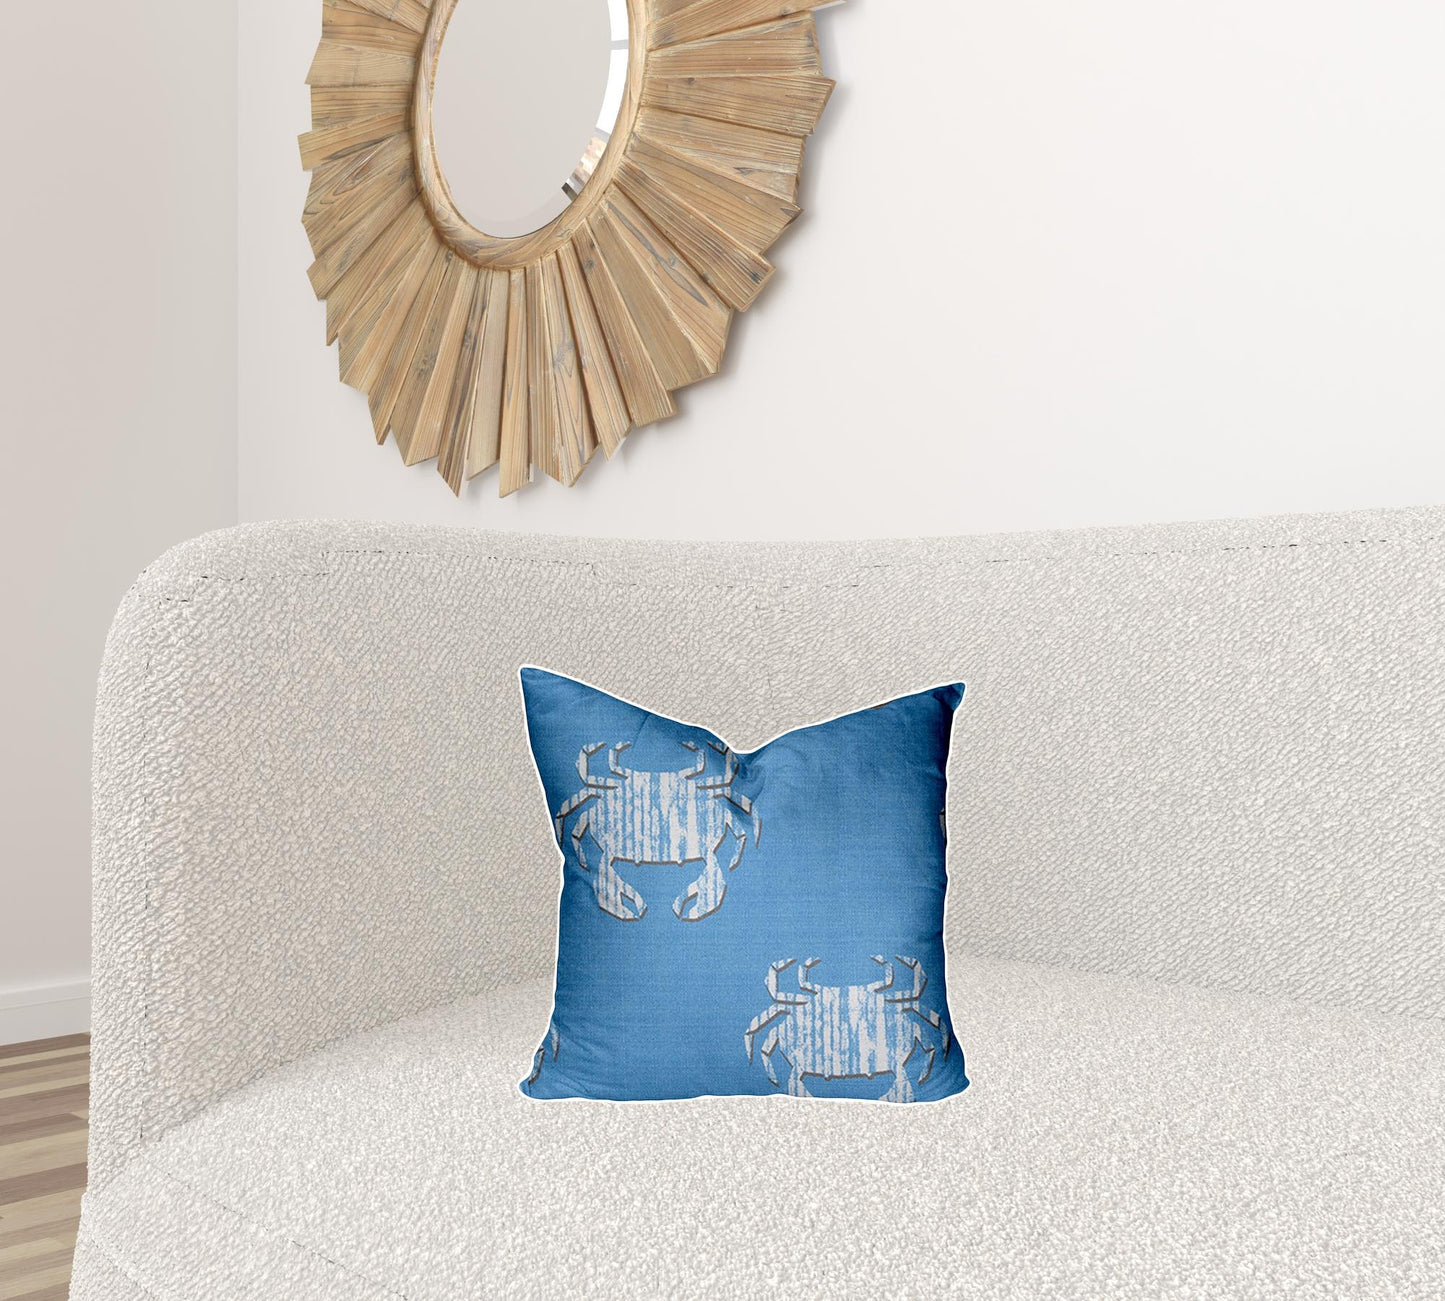 16" X 16" Blue And White Crab Enveloped Coastal Throw Indoor Outdoor Pillow Cover